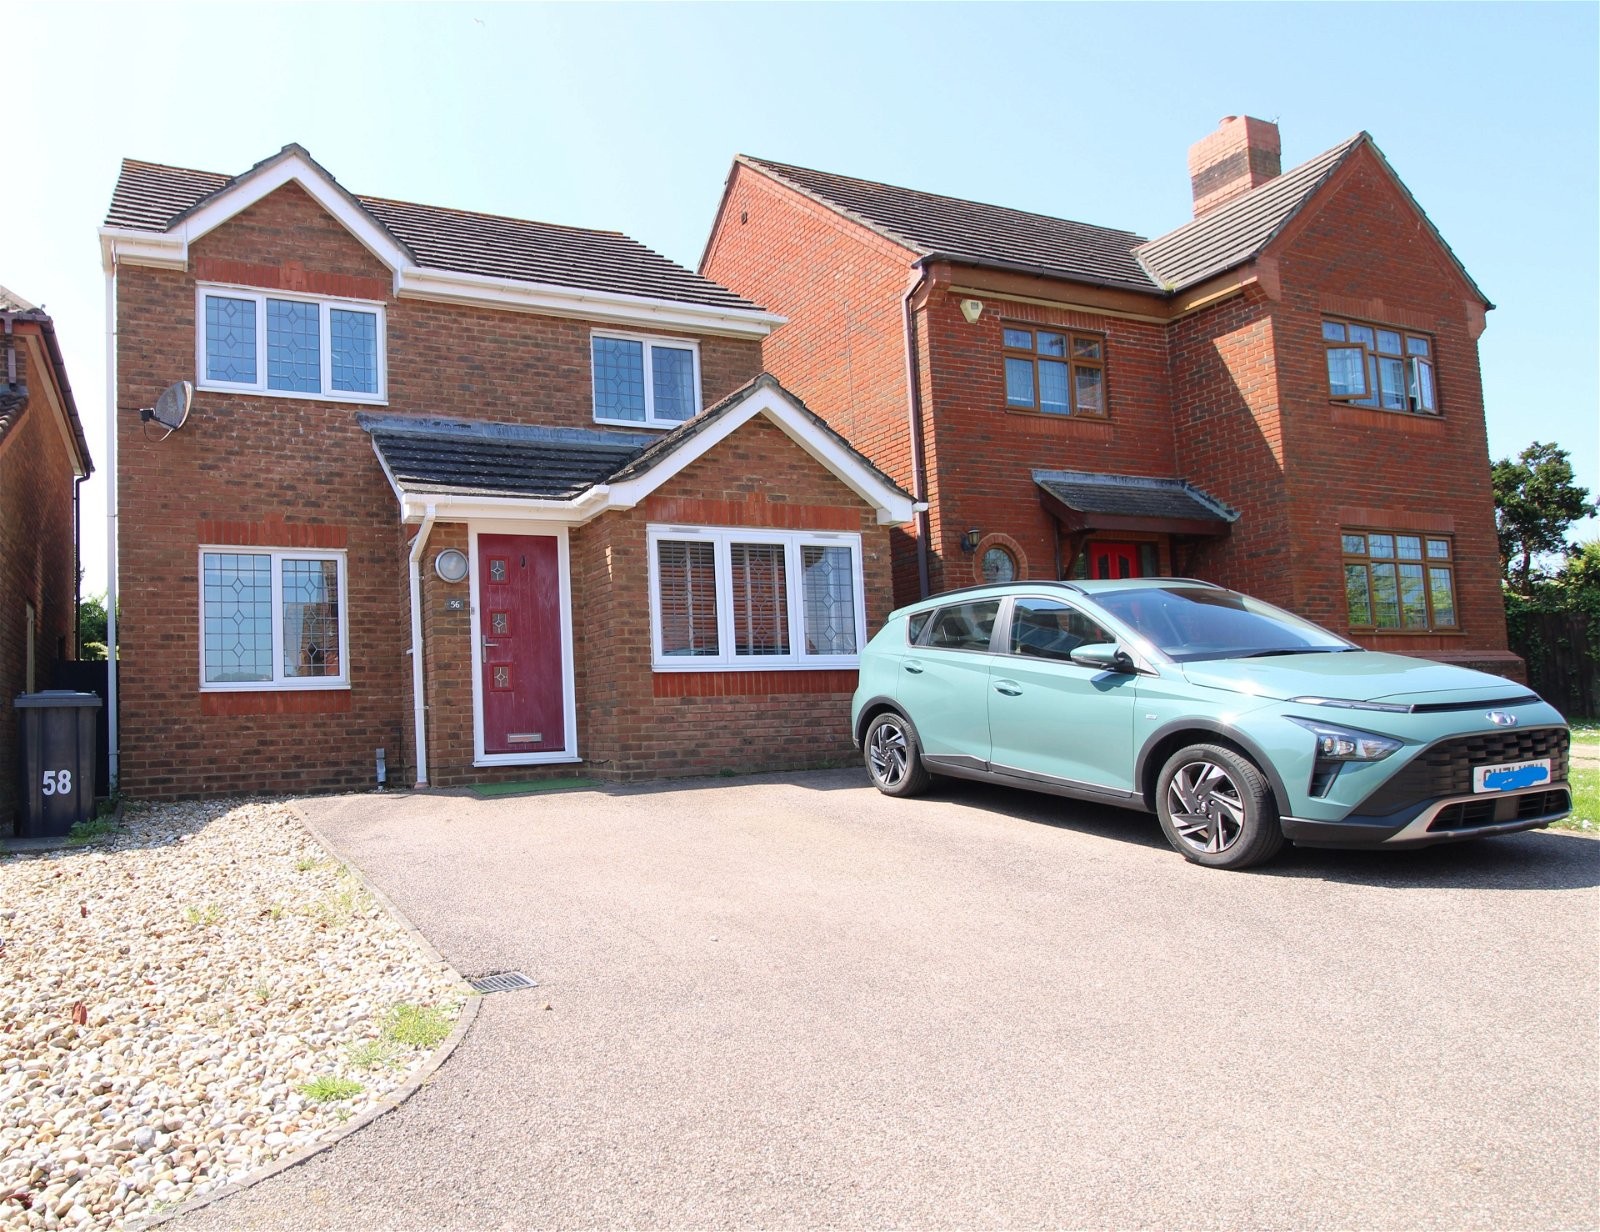 Images for Beaulieu Drive, Stone Cross, Pevensey, BN24 5DN